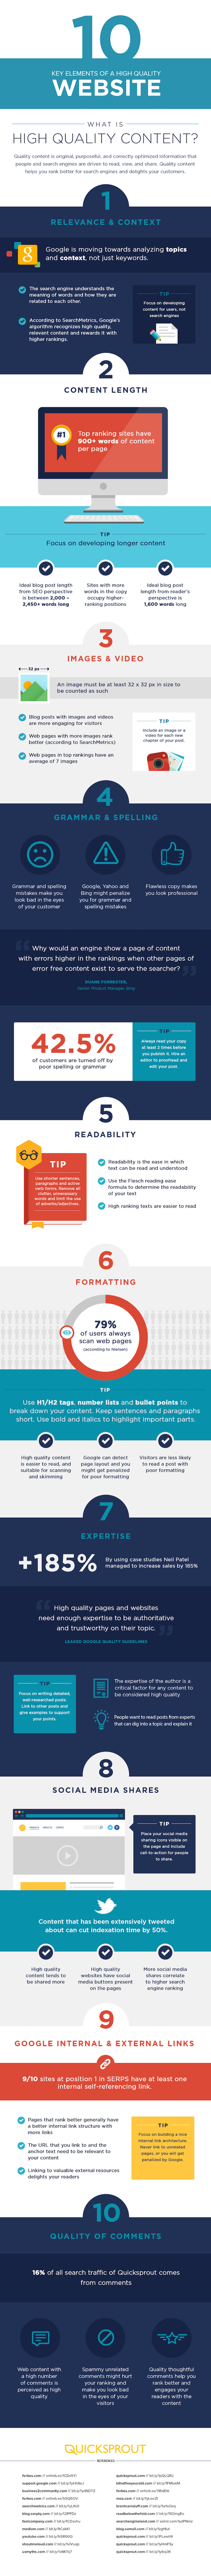 The 10 Things You Need to Make a High Quality Website for Your Business Infographic image